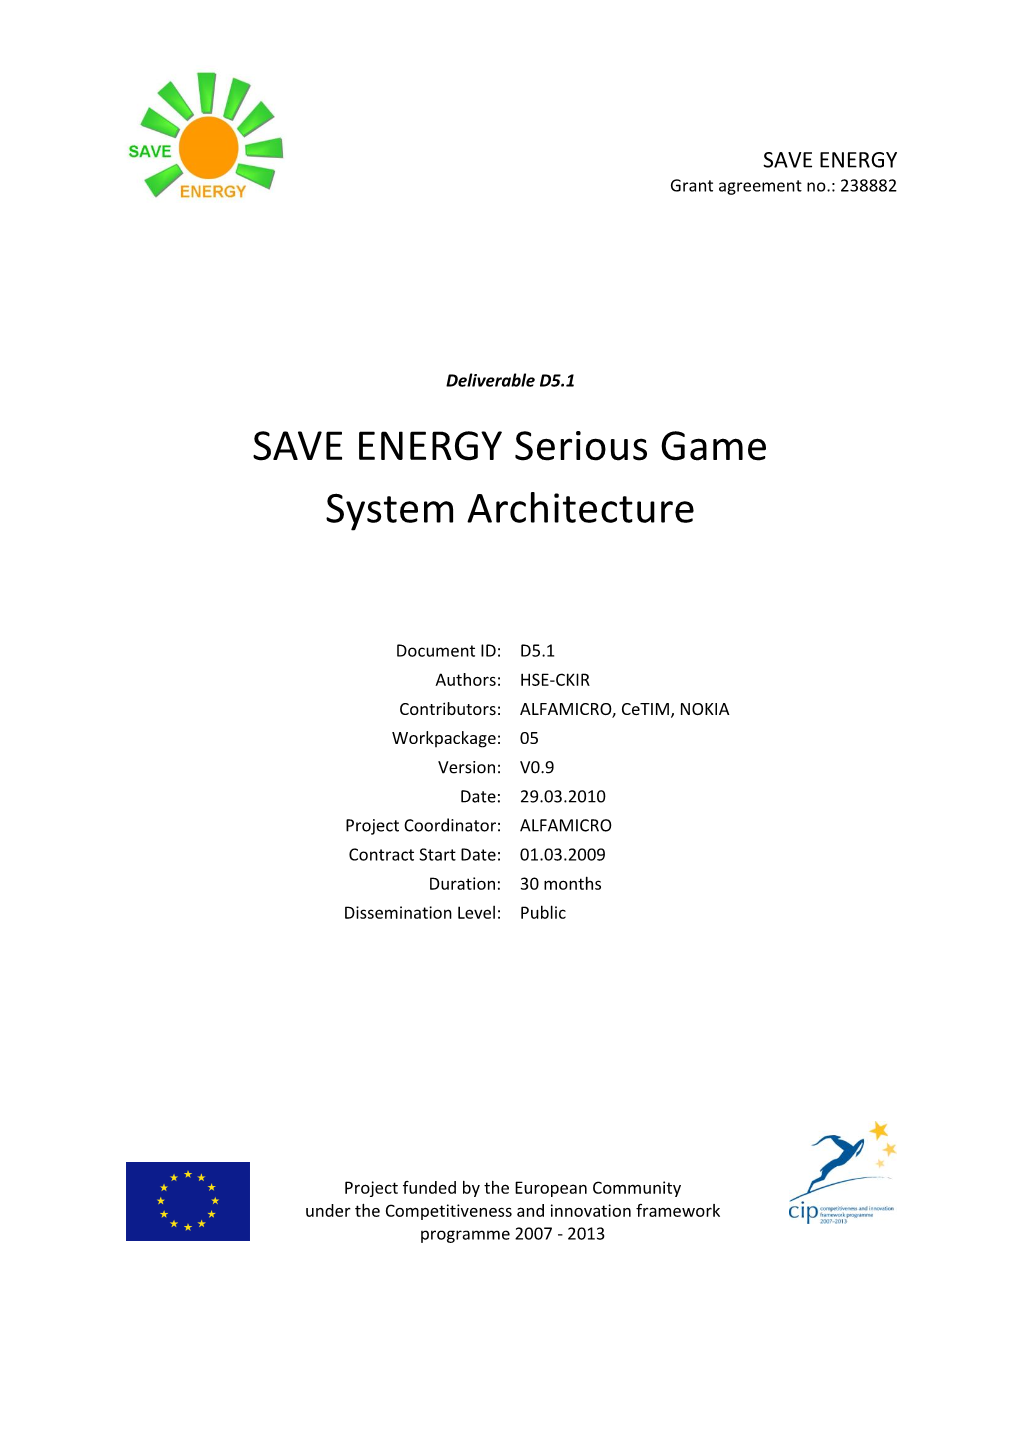 SAVE ENERGY Serious Gamesystem Architecture